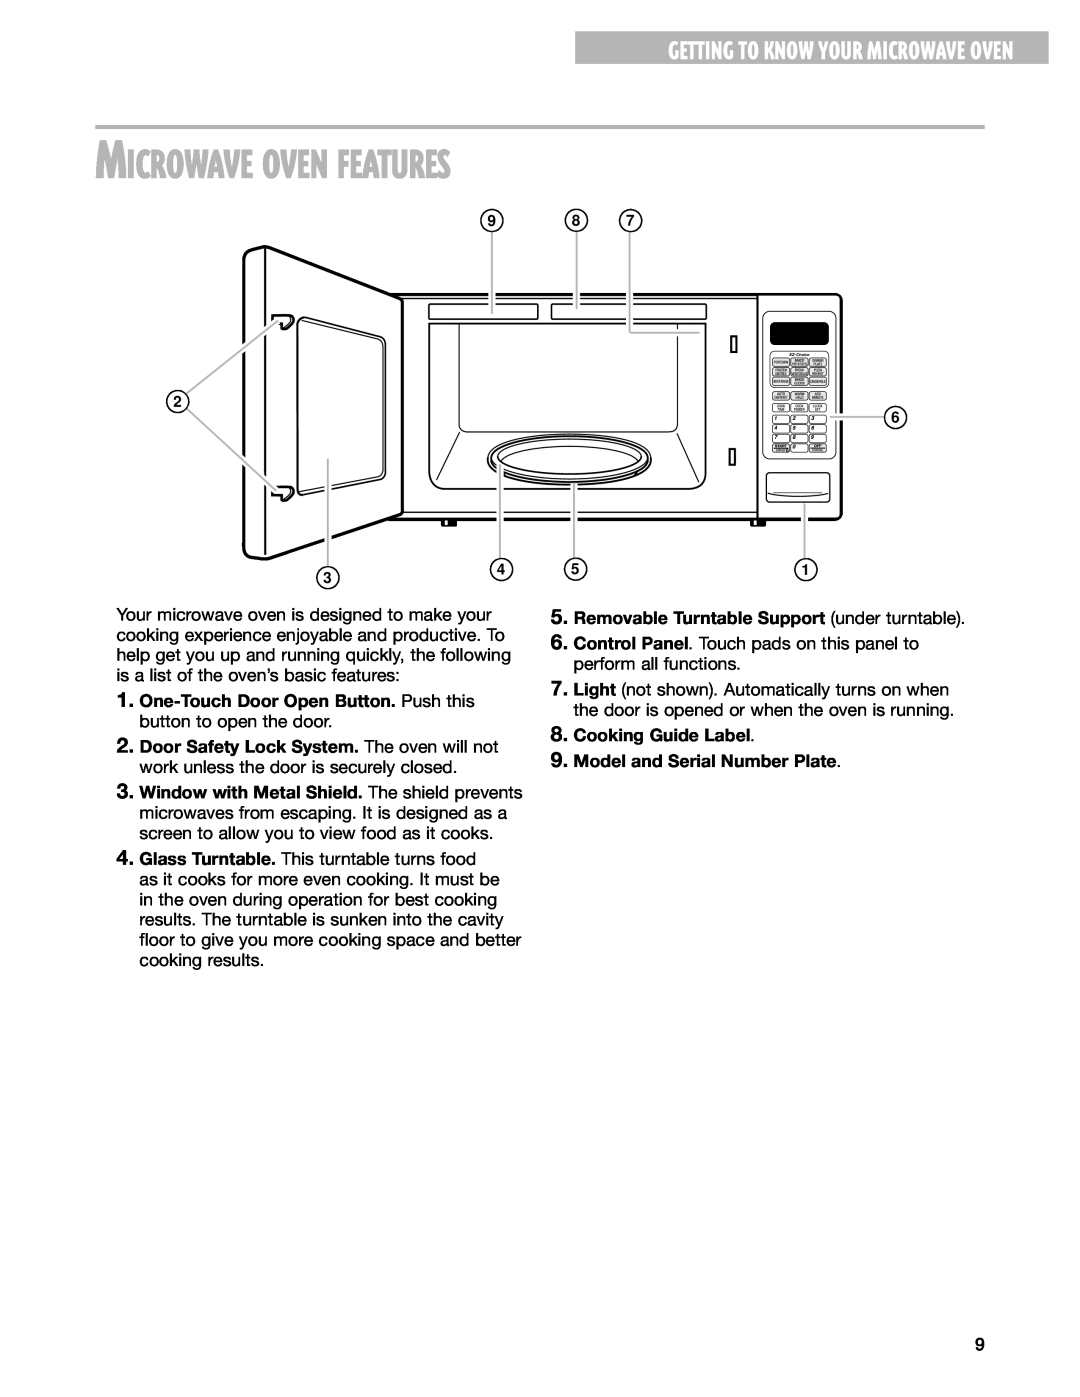 Whirlpool MT1071SG, MT1078SG installation instructions Microwave Oven Features, Getting To Know Your Microwave Oven 